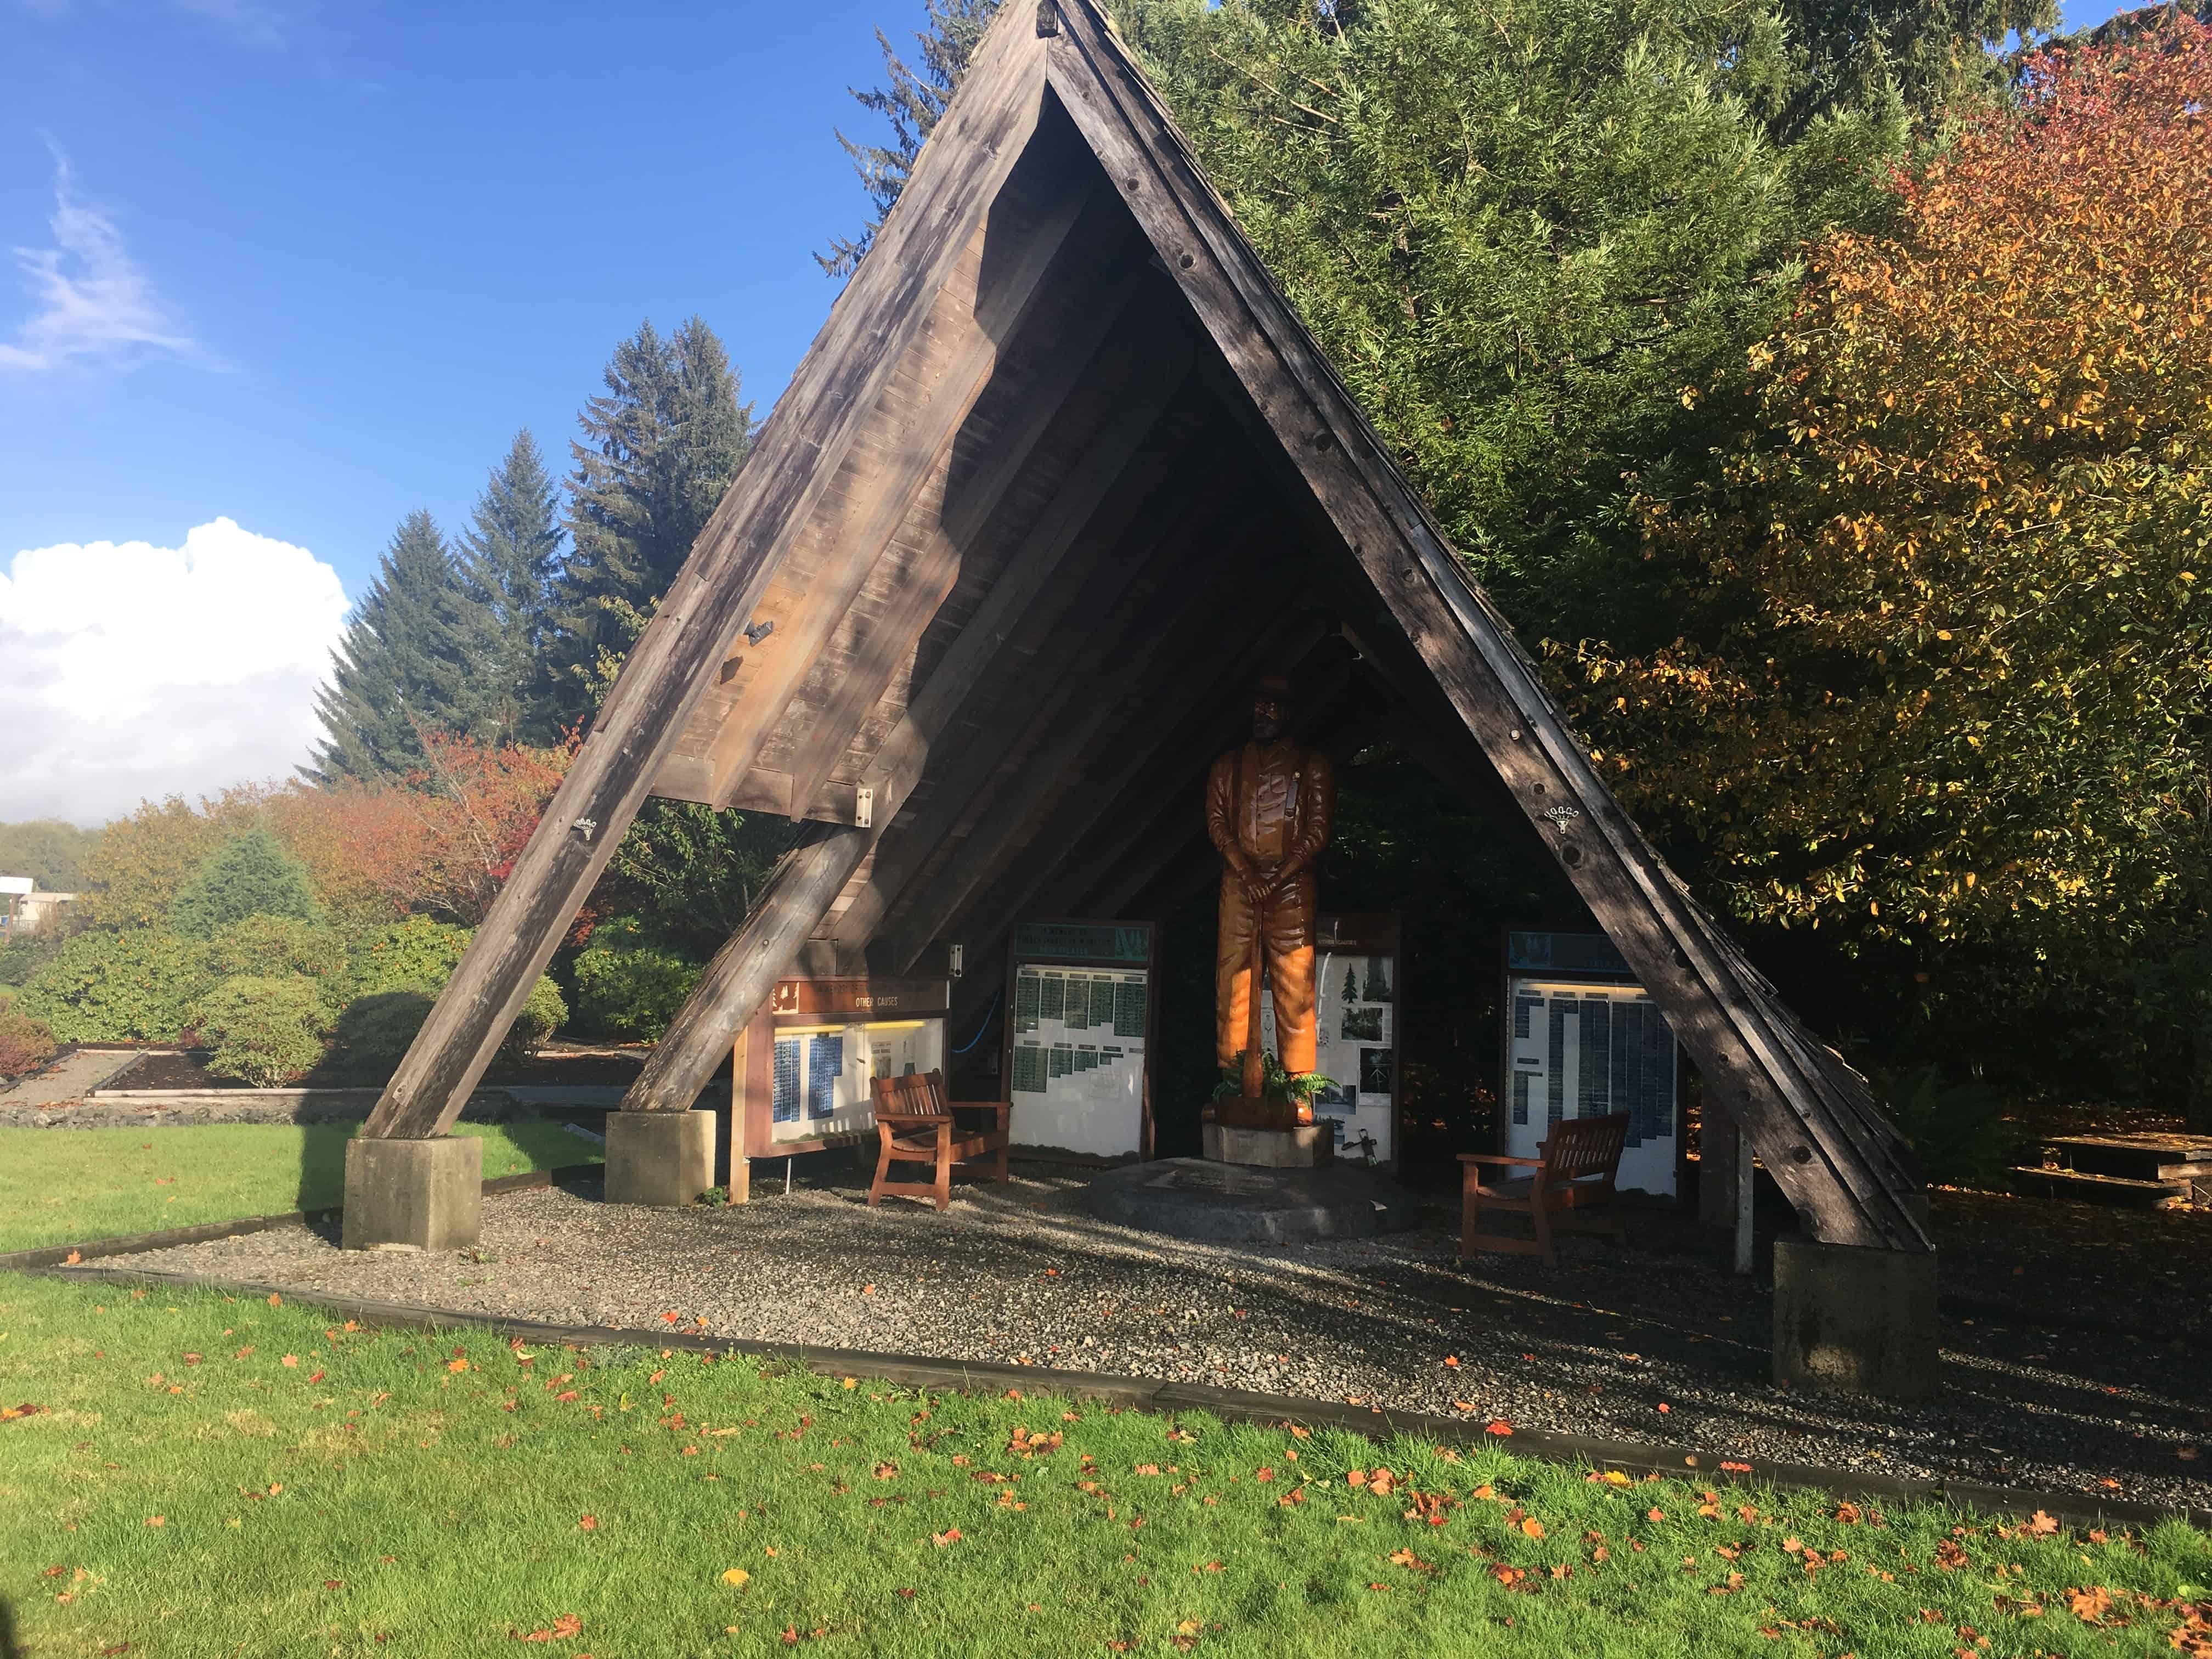 Memorial to timber industry workers at the Forks Timber Museum in Forks, Washington